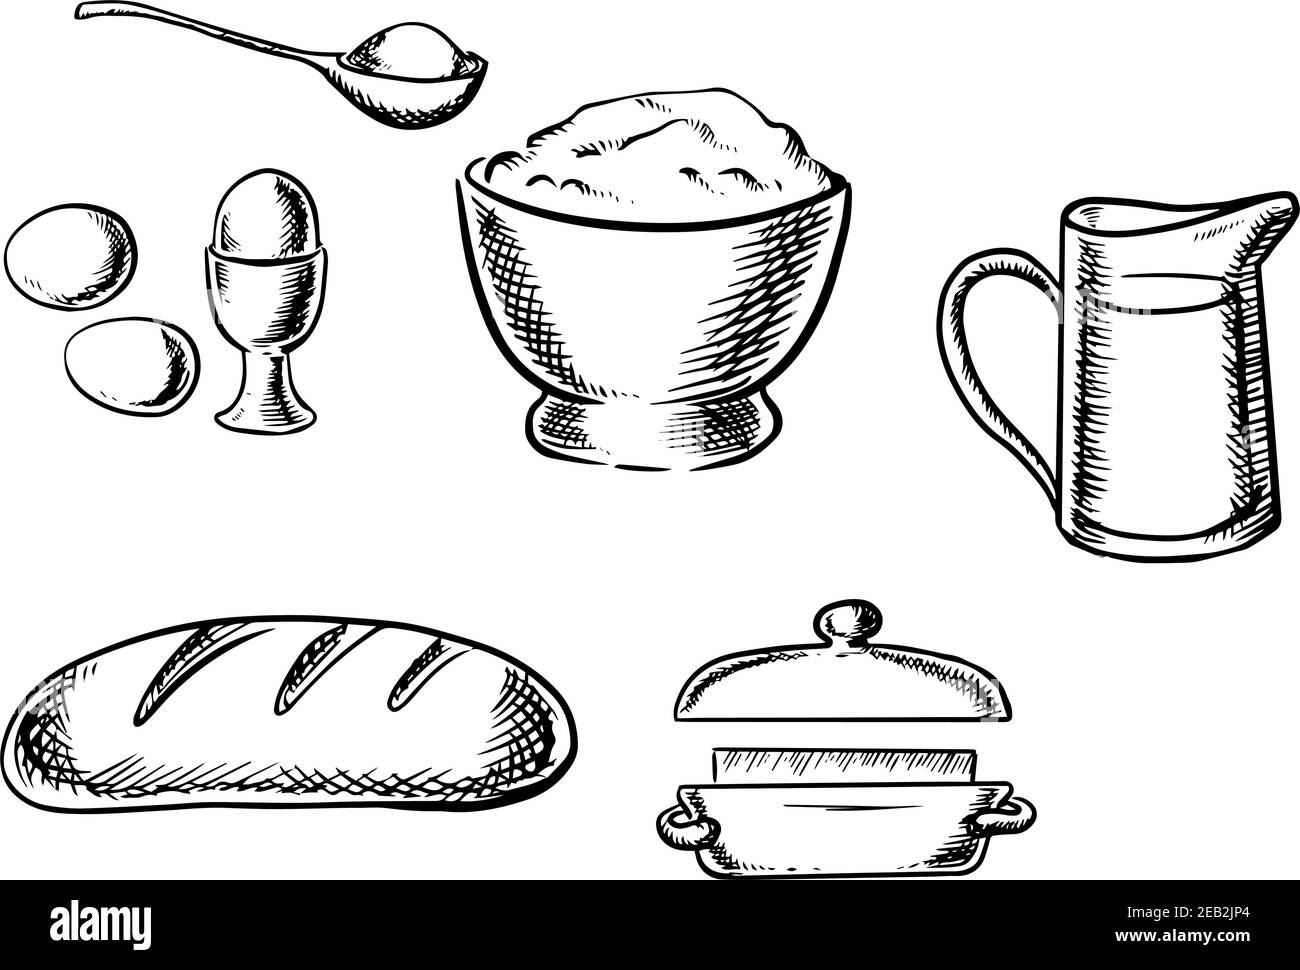 Black and white sketch baking ingredient icons with eggs, flour, milk, bread and butter Stock Vector